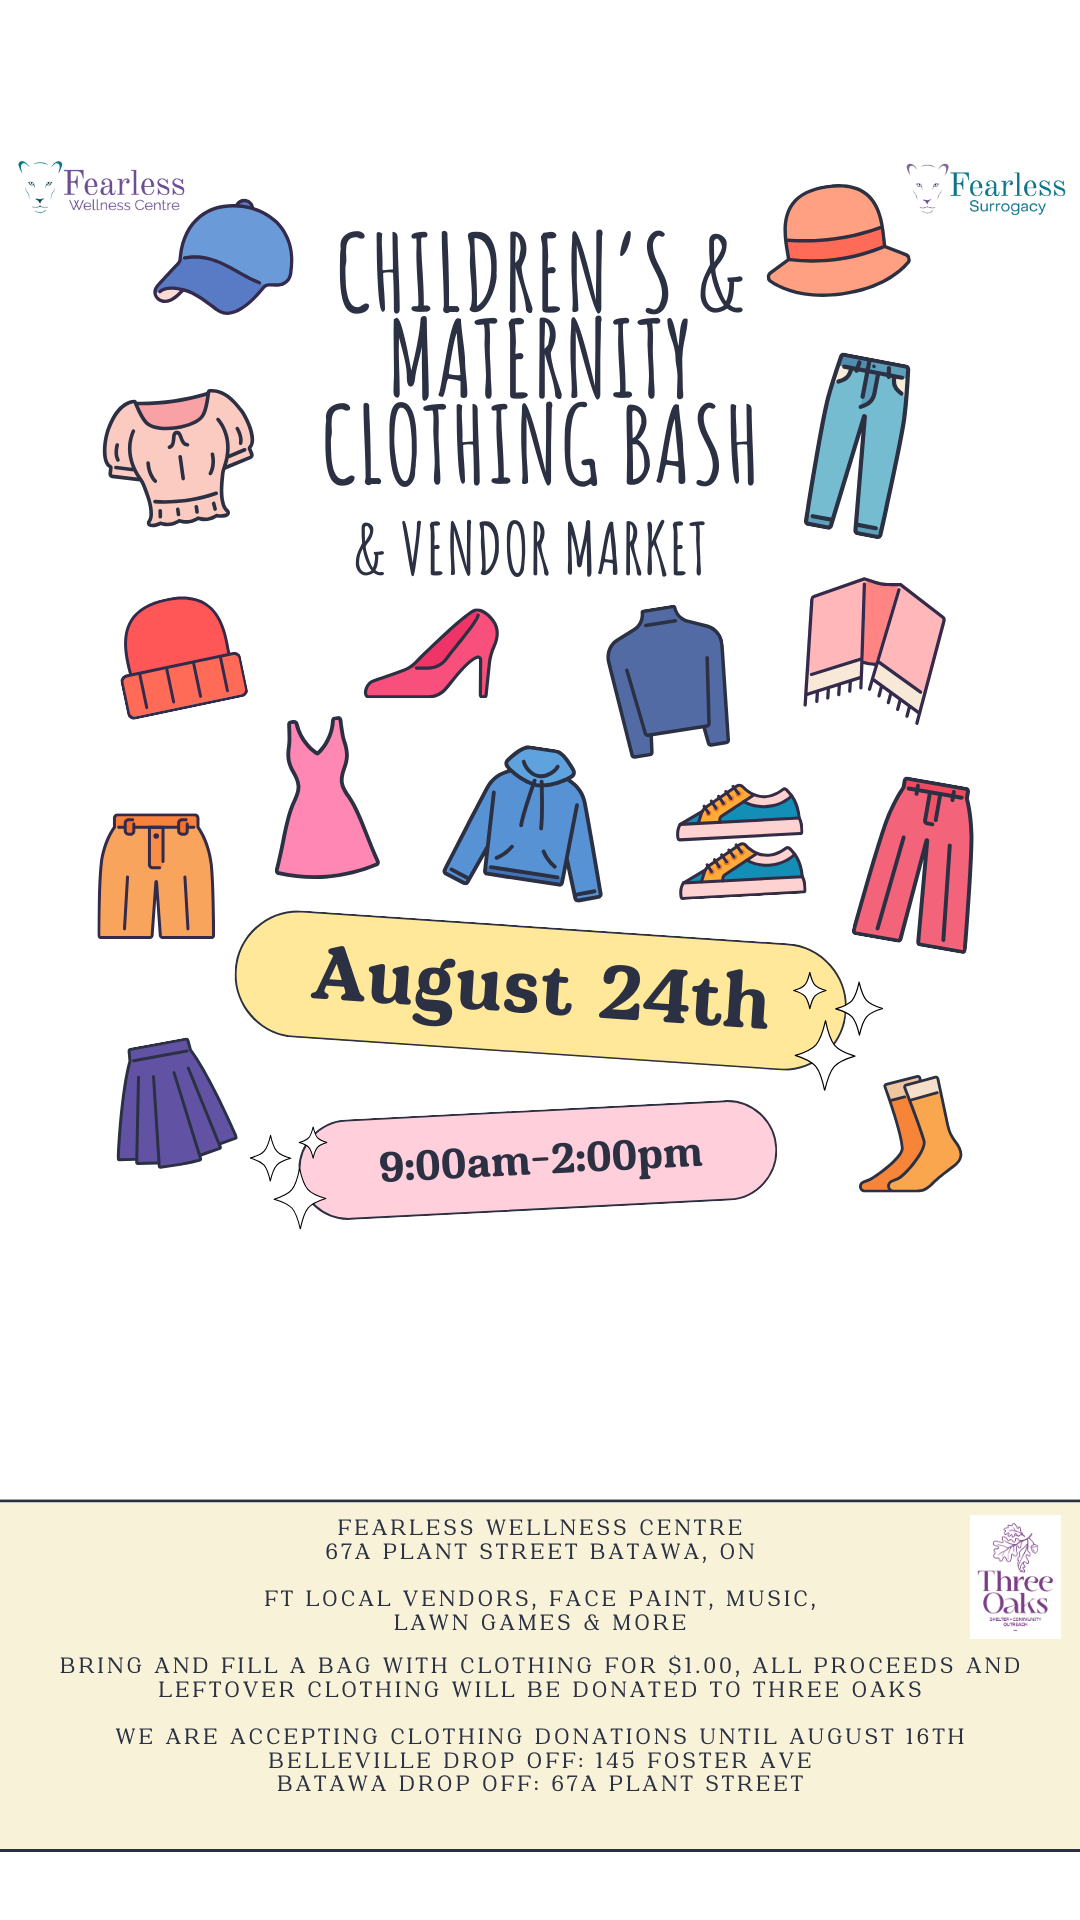 Poster for event with details and colourful graphics of articles of clothing